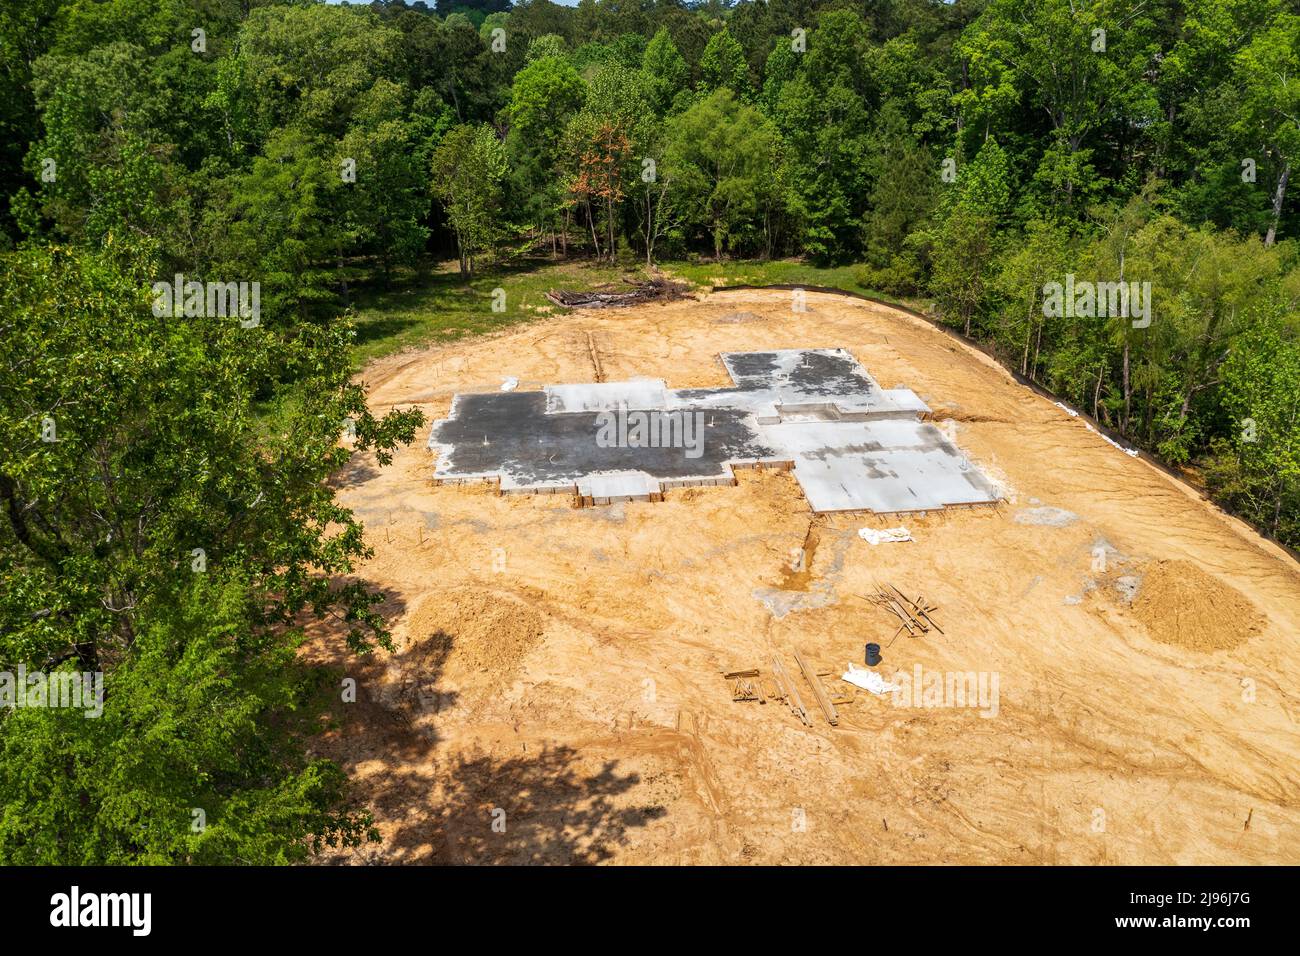 New Home construction site with concrete foundation Stock Photo